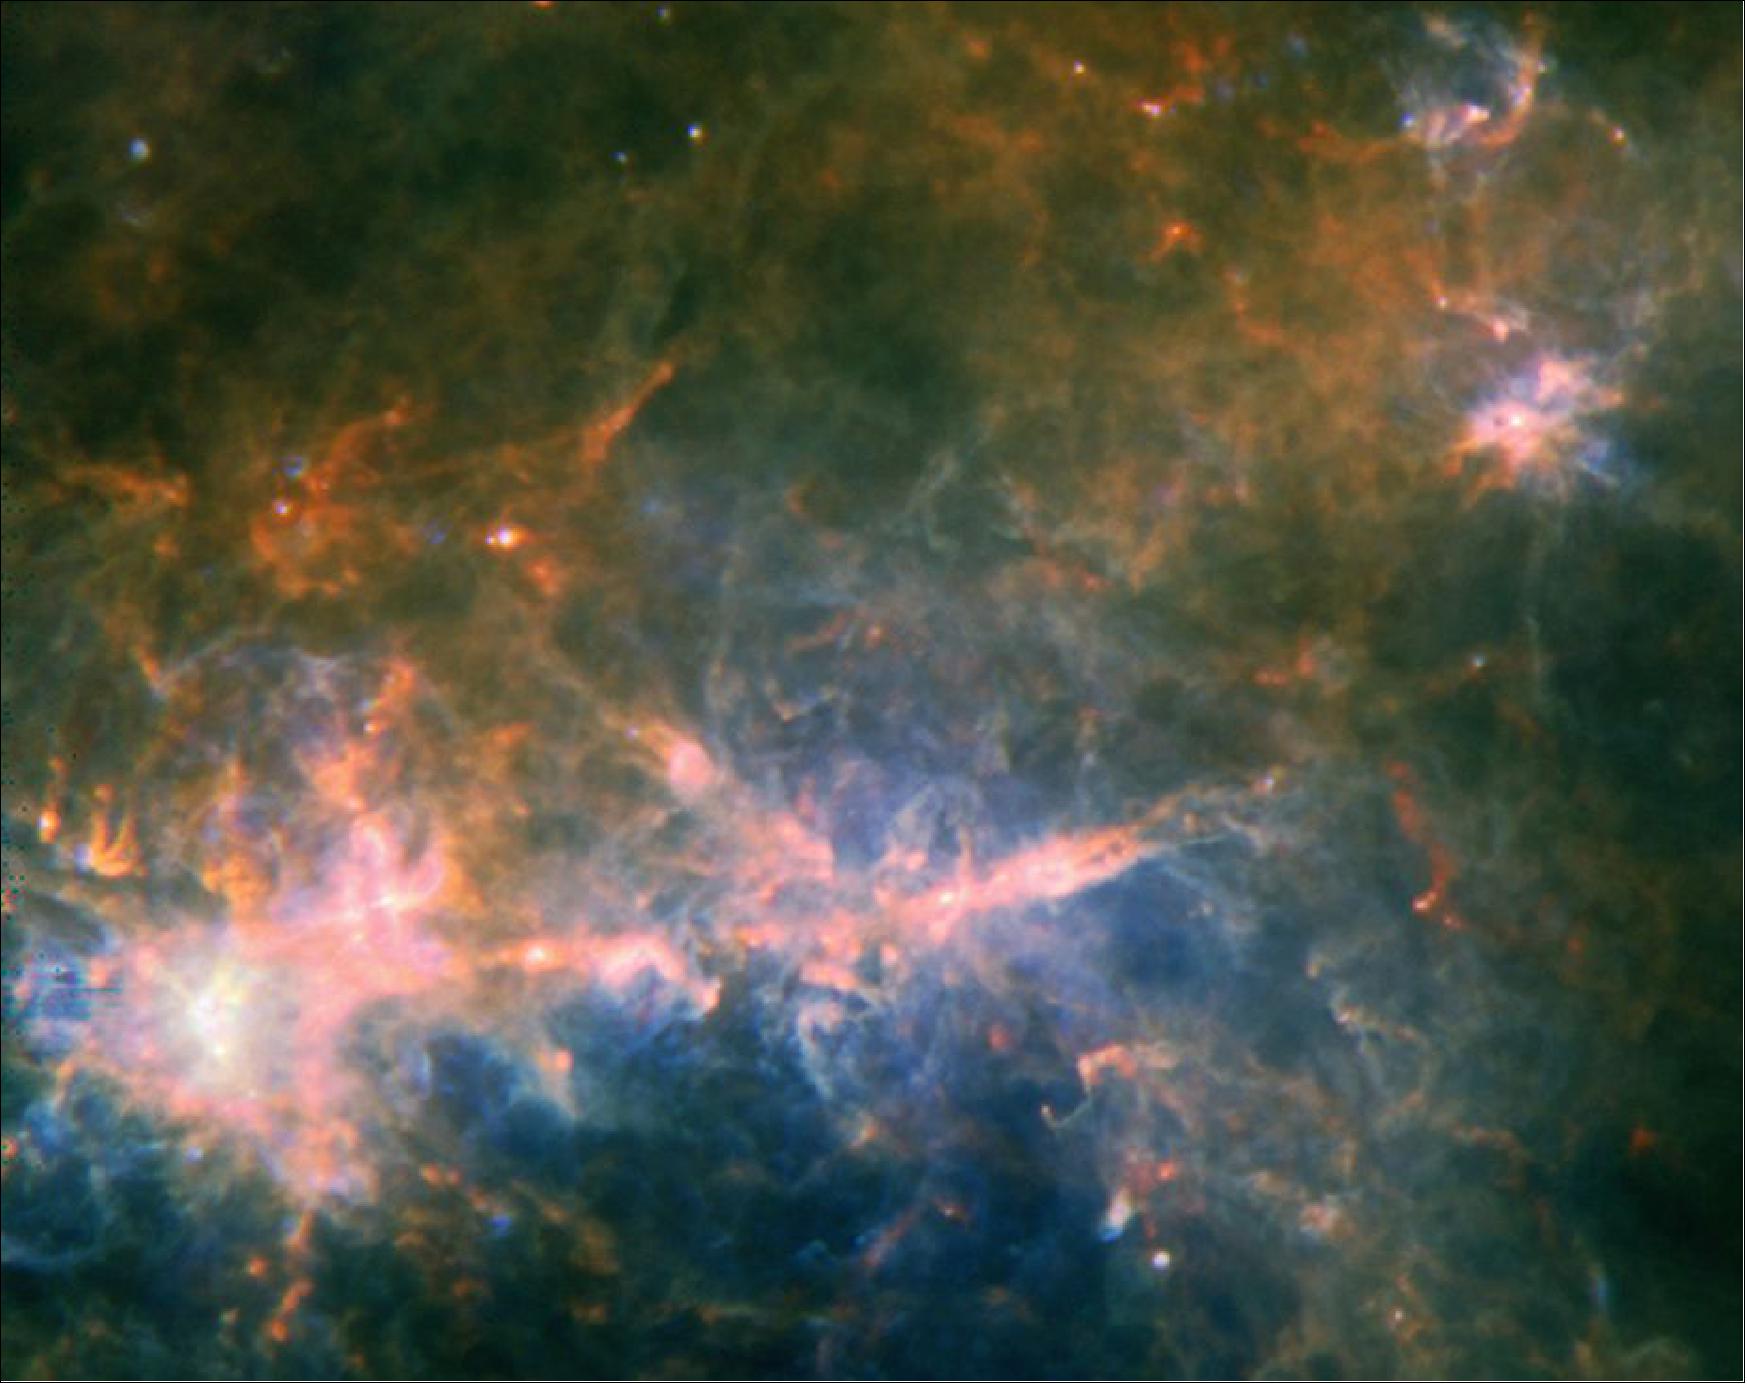 Figure 51: The G49 filament seen by ESA's Herschel space observatory. With a total mass over 80 000 solar masses, this huge but slender structure of gas and dust extends over about 280 light-years in length, while its diameter is only about 5 light-years (image credit: ESA/Herschel/PACS/SPIRE/Ke Wang et al., 2015) 55)